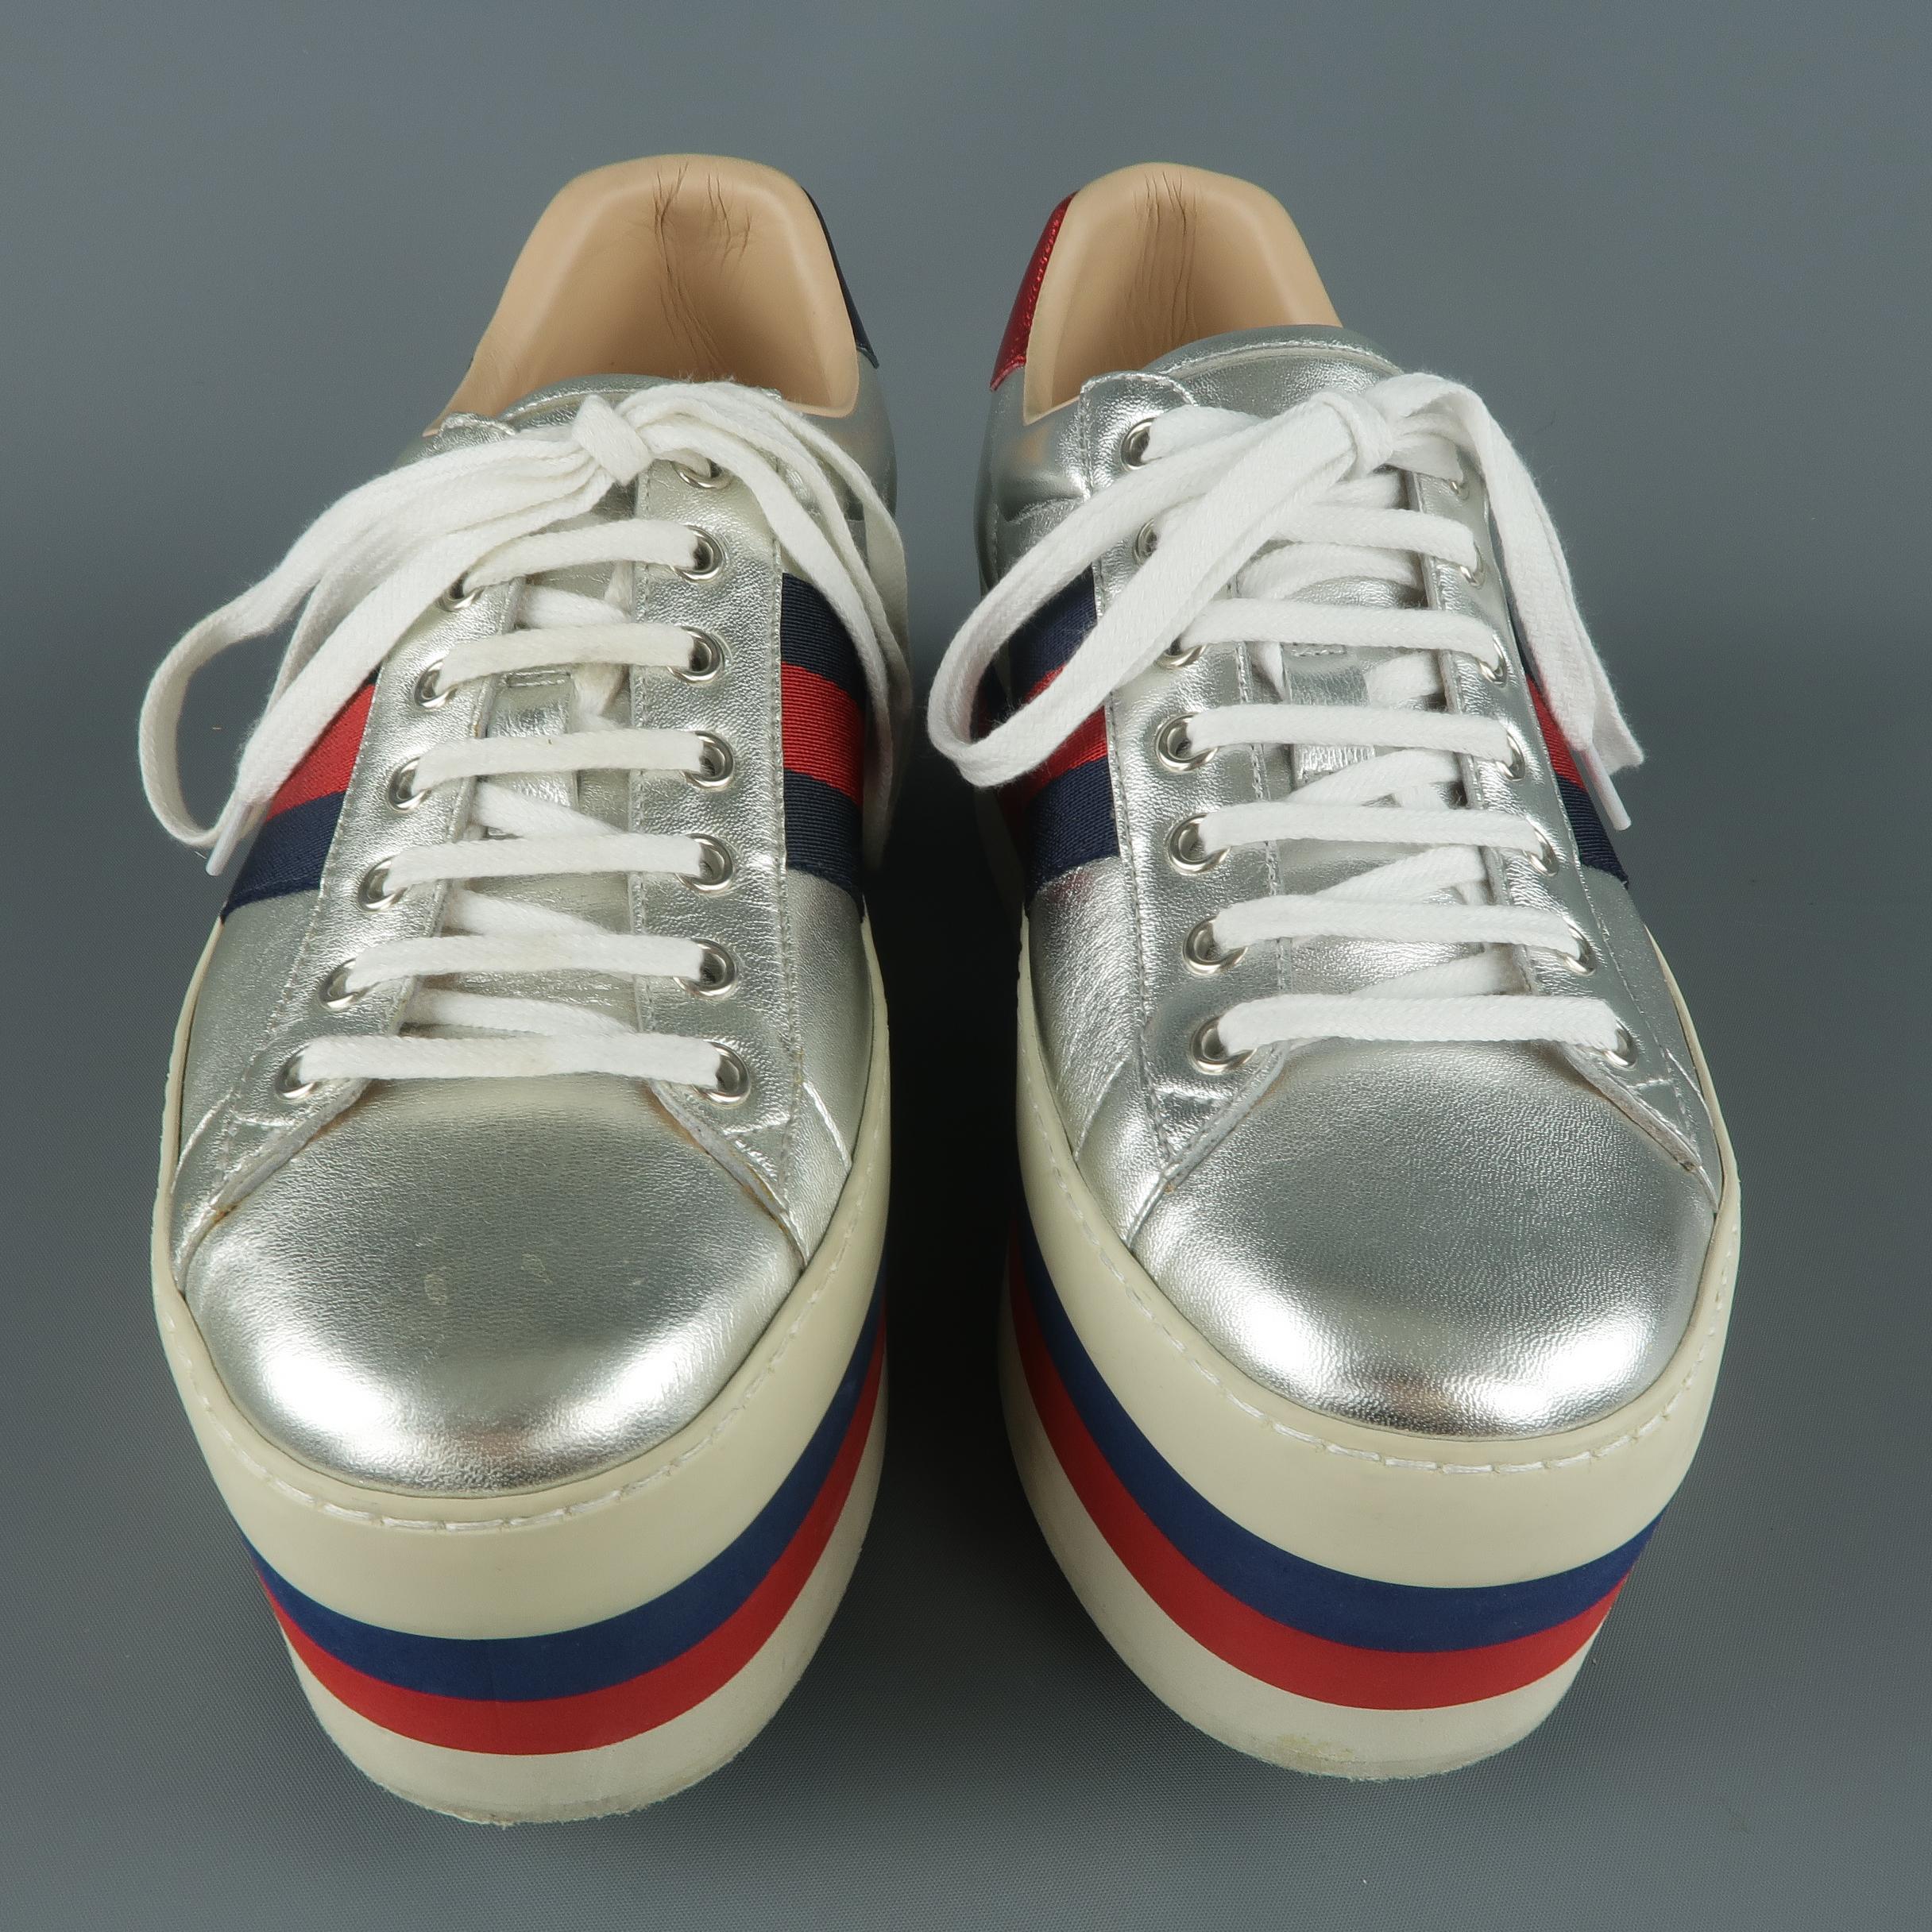  GUCCI Taille 8 Silver Metallic Leather Striped Platform Sneakers Shoes Pour hommes 